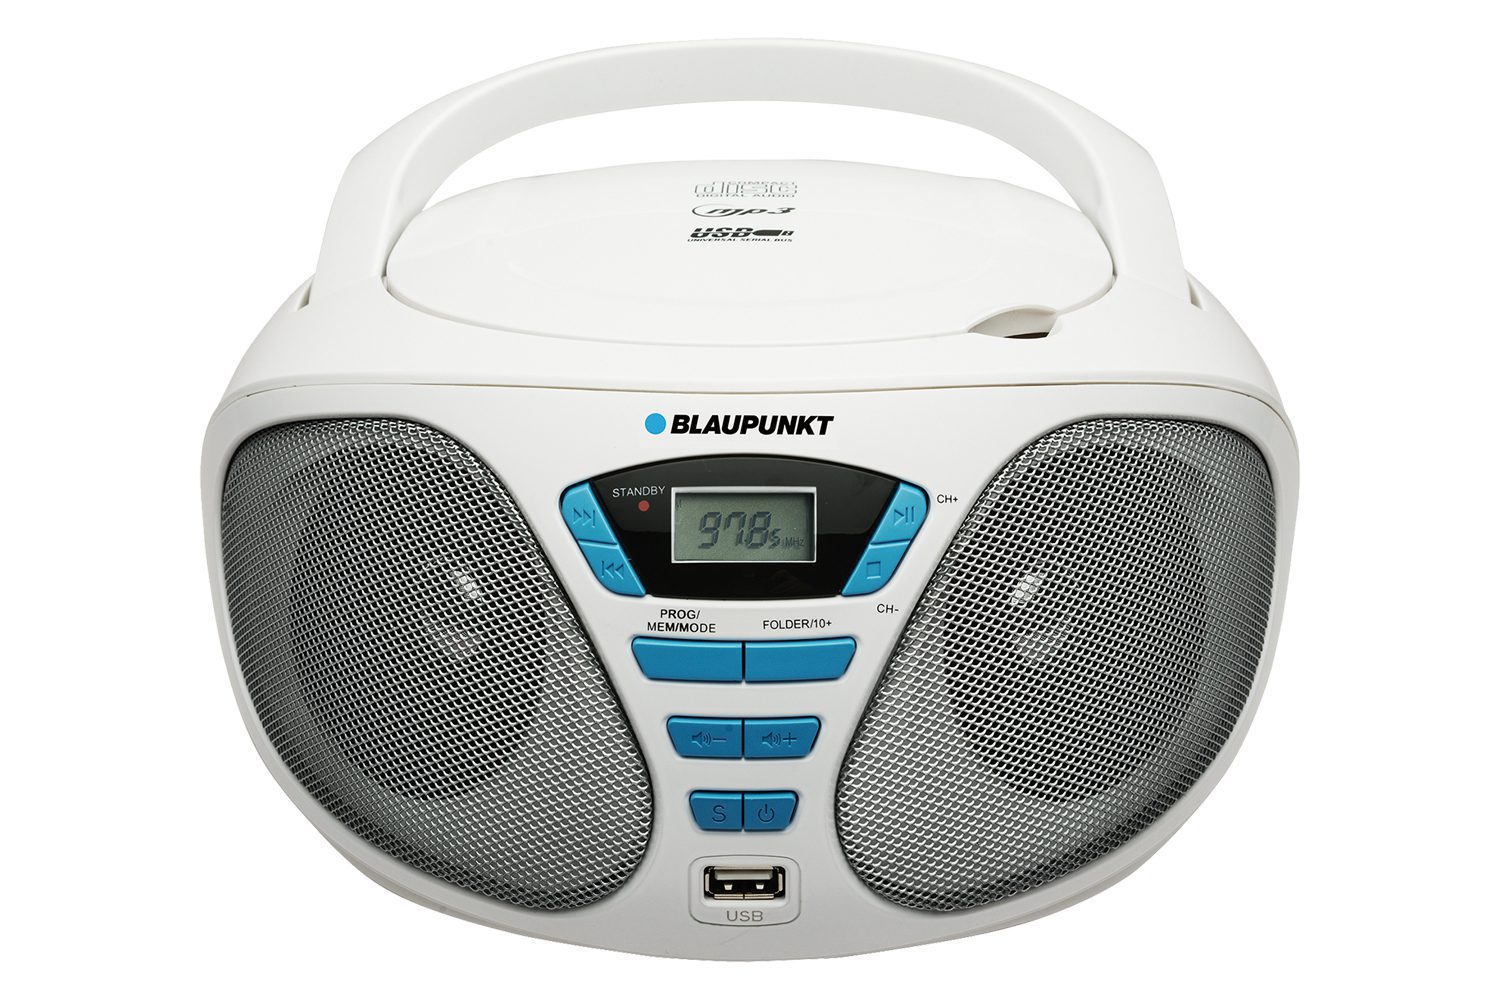 Portable CD/MP3/DAB & Cassette Player with USB and PLL FM radio